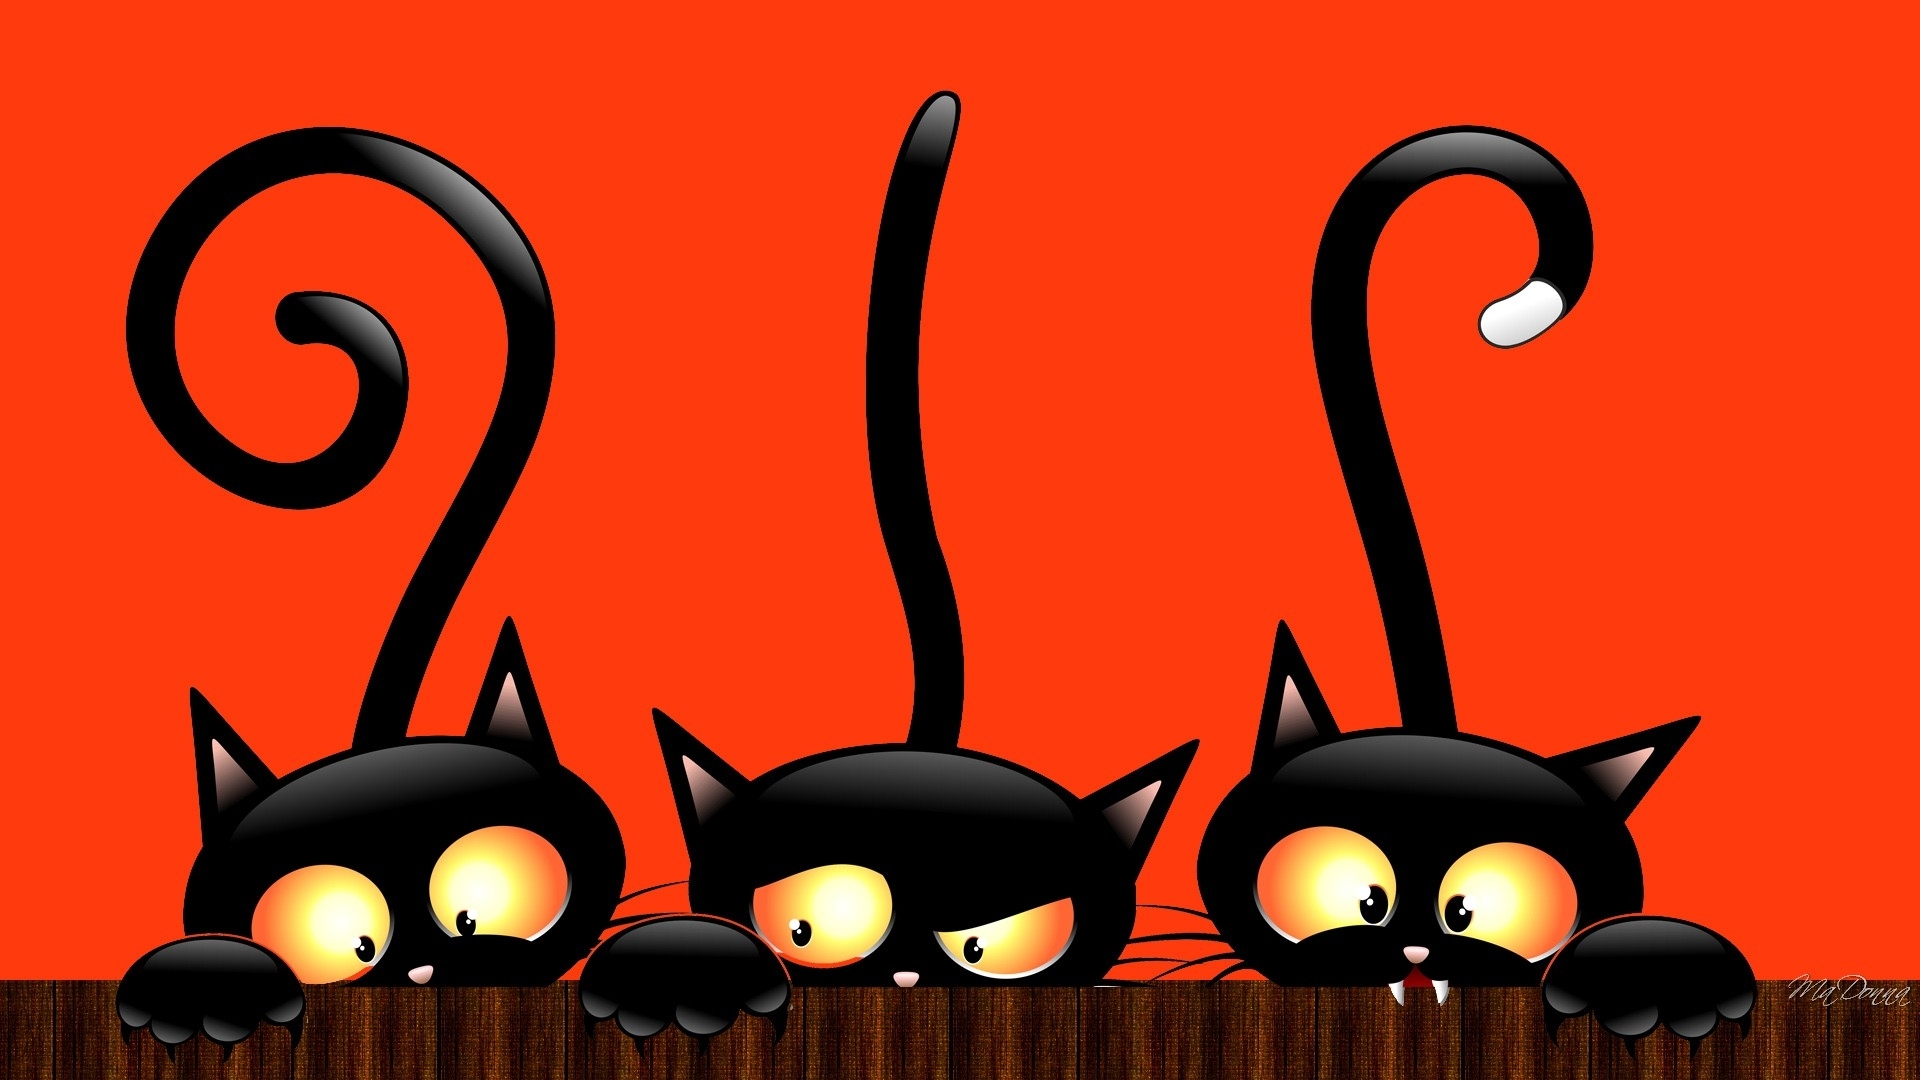 10 New Cute Halloween Hd Wallpaper FULL HD 1920×1080 For PC Background